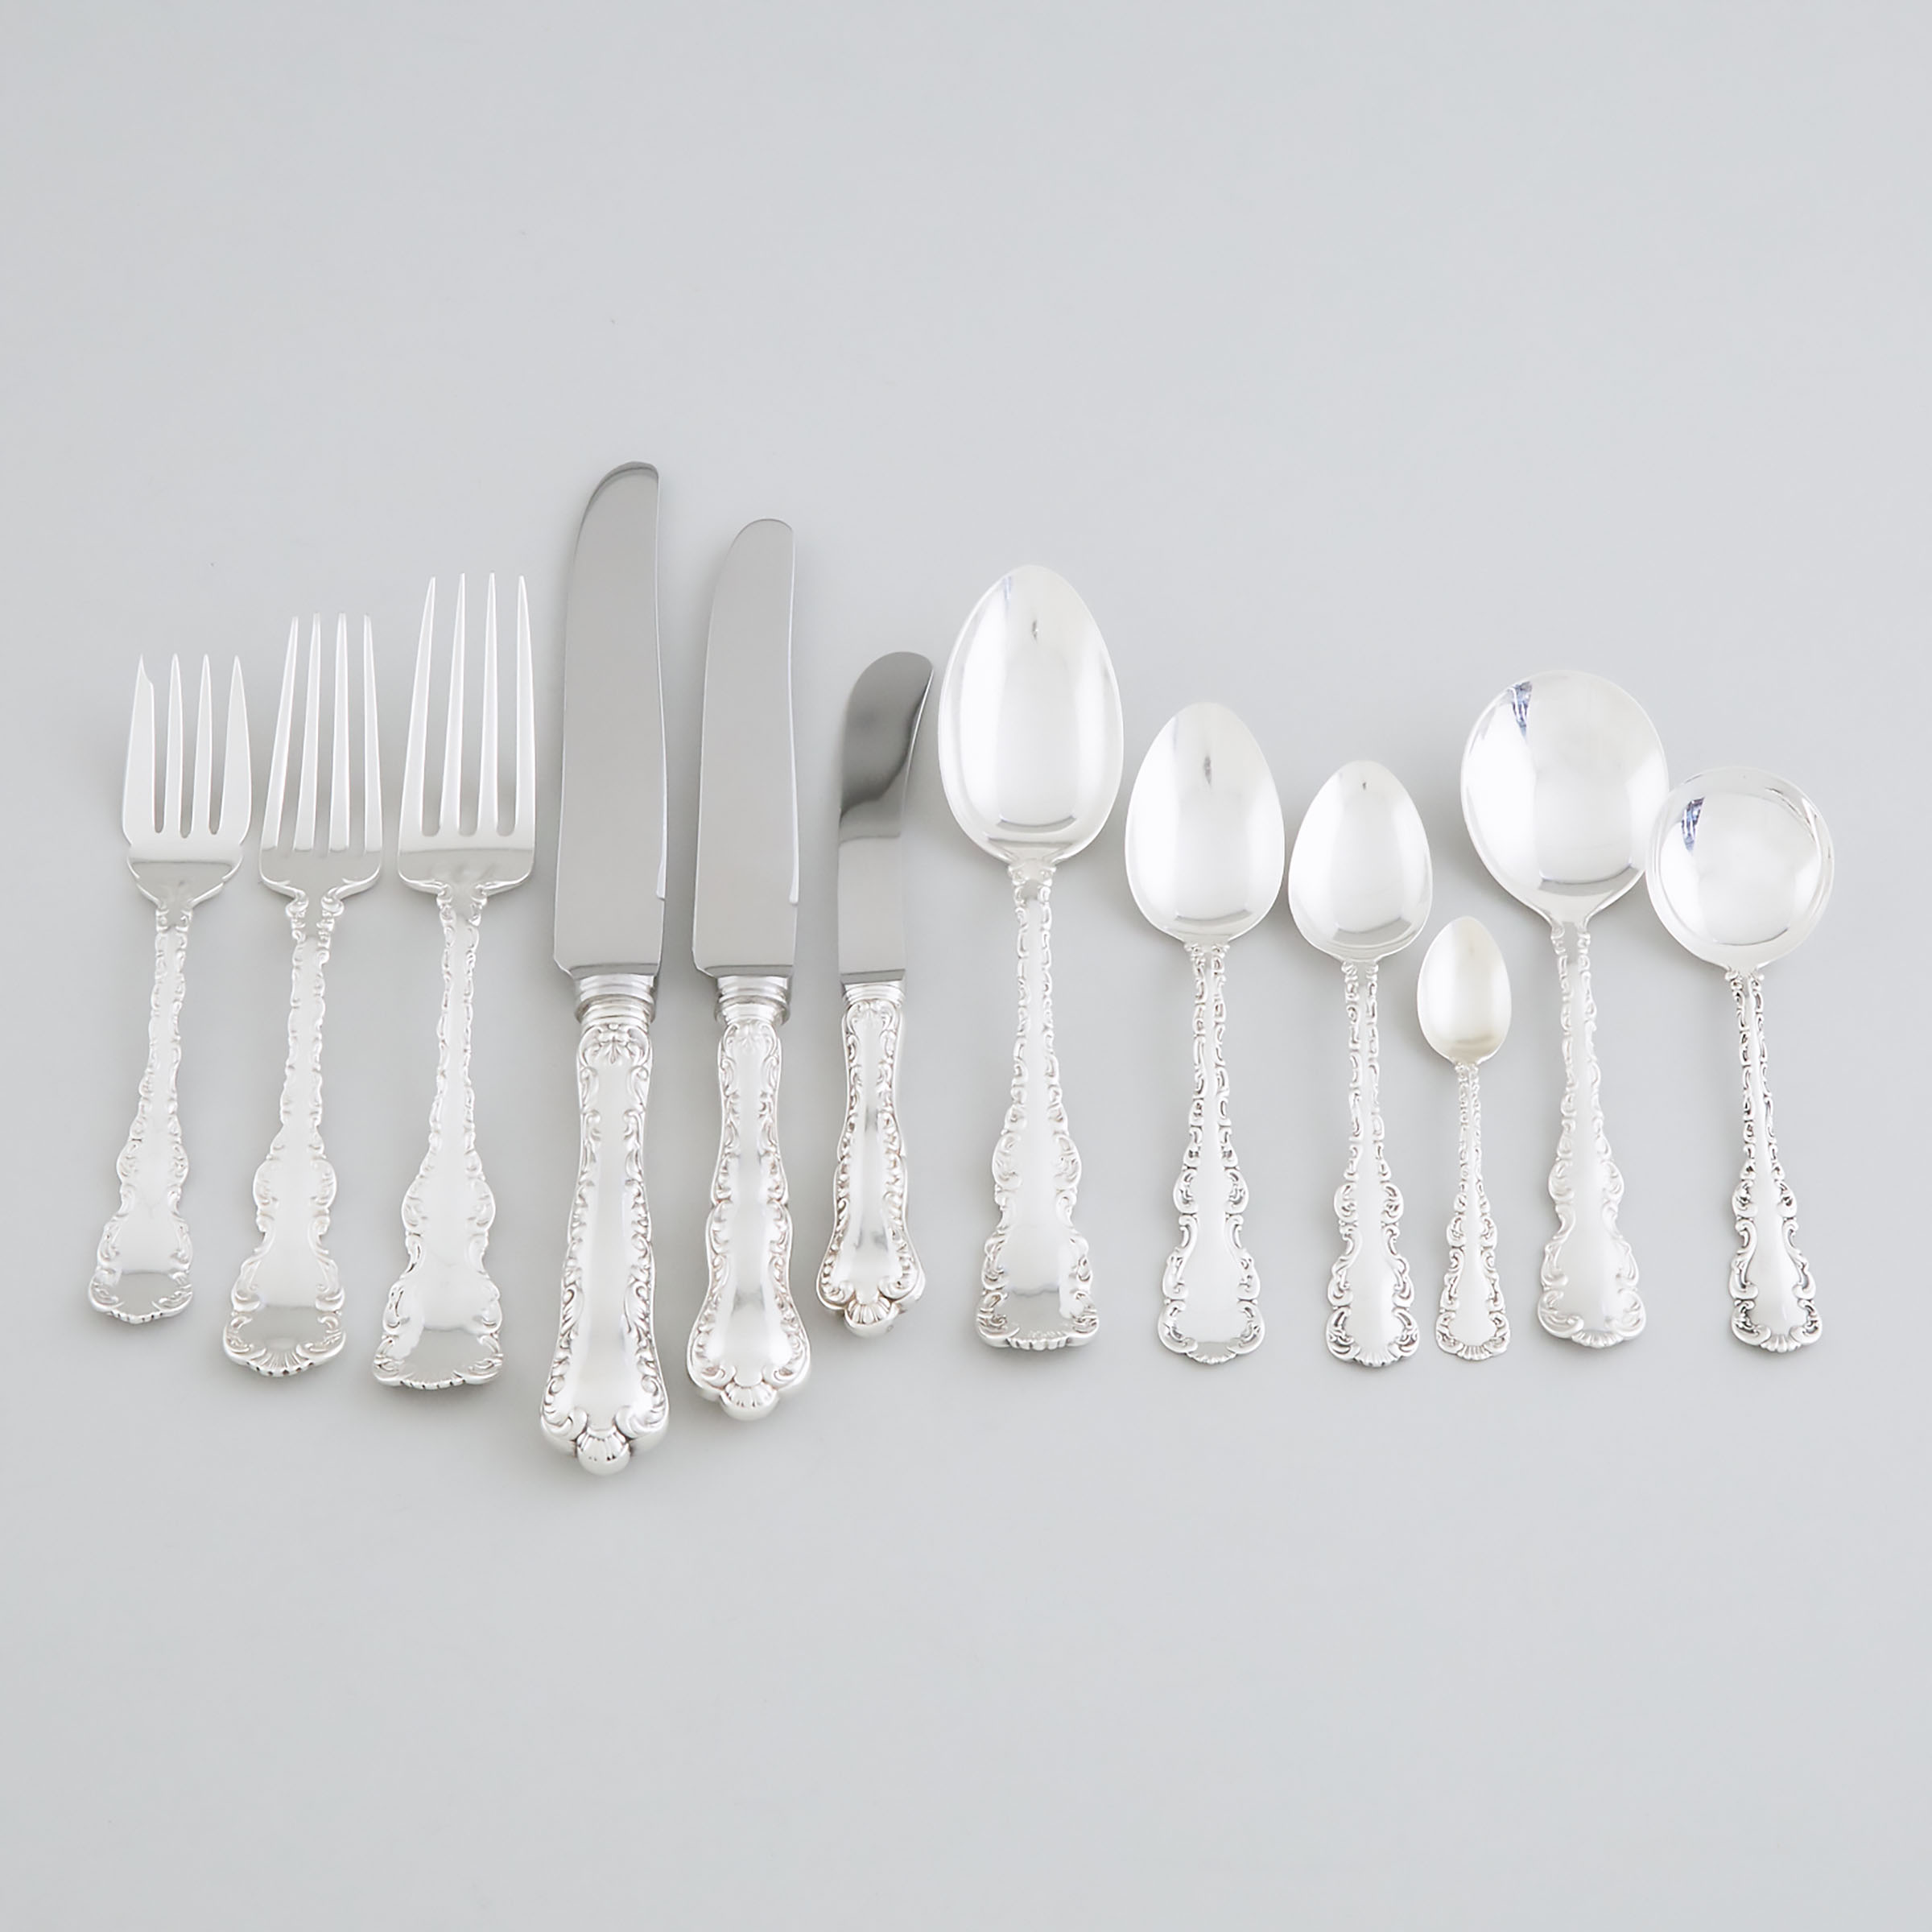 Assembled Canadian Silver 'Louis XV' Pattern Flatware Service, mainly Henry Birks & Sons, Montreal, Que., 20th century